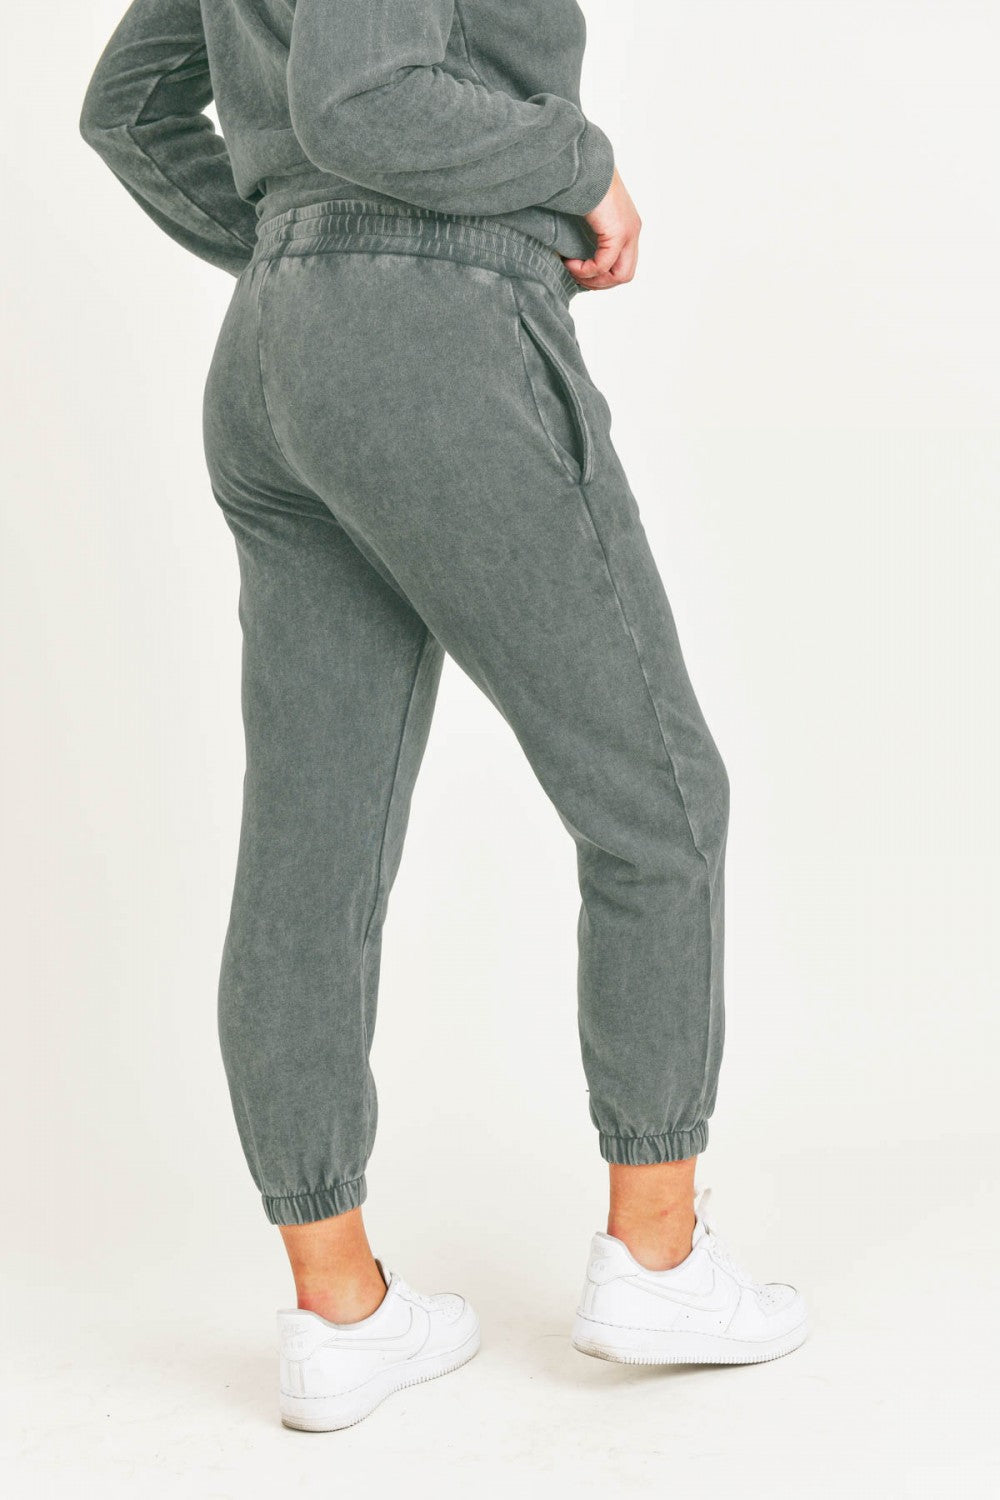 Ready Or Not Mineral Wash Joggers 3X